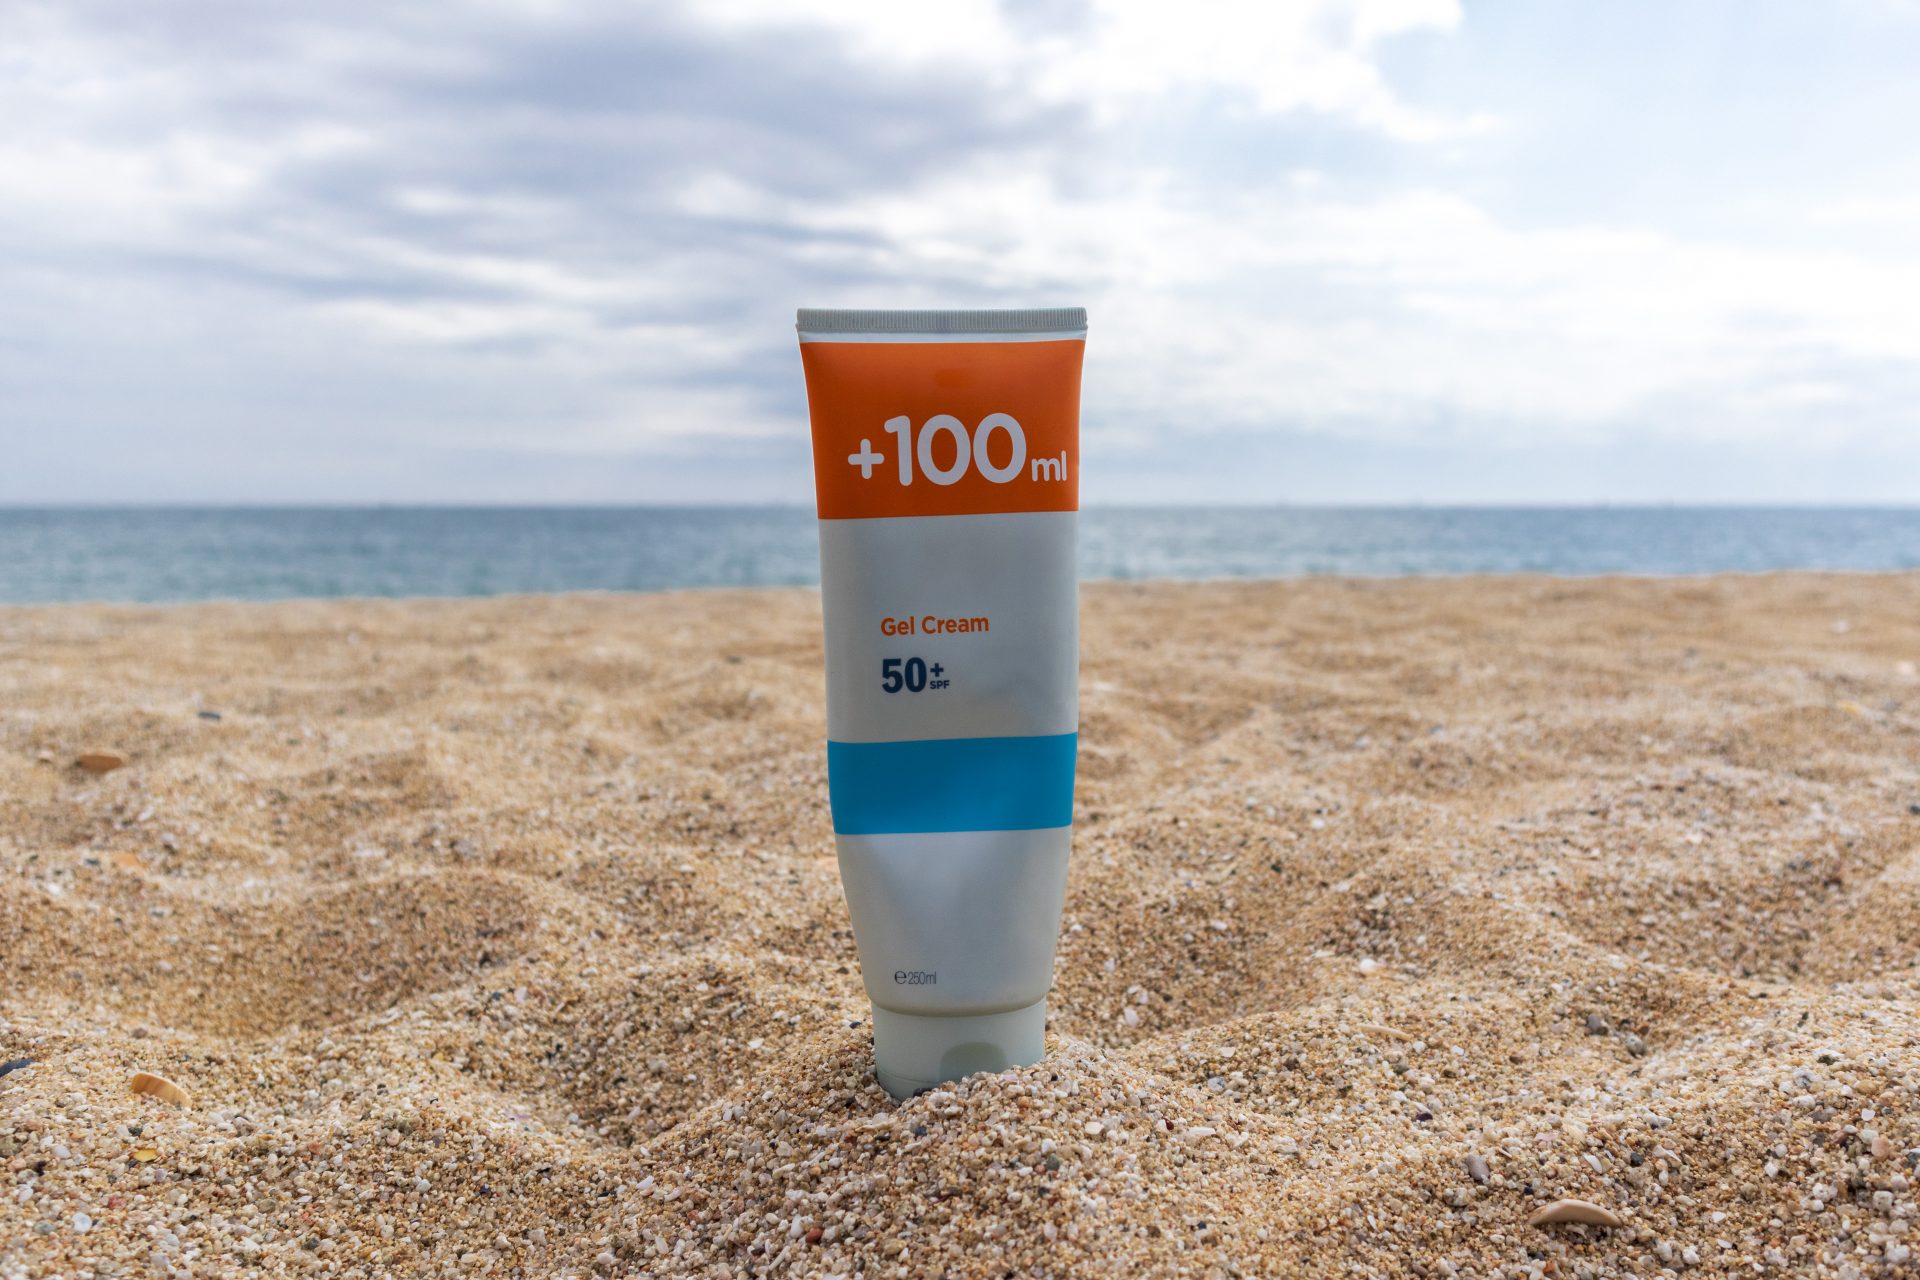 We need protection from the sun but is sunscreen actually safe?